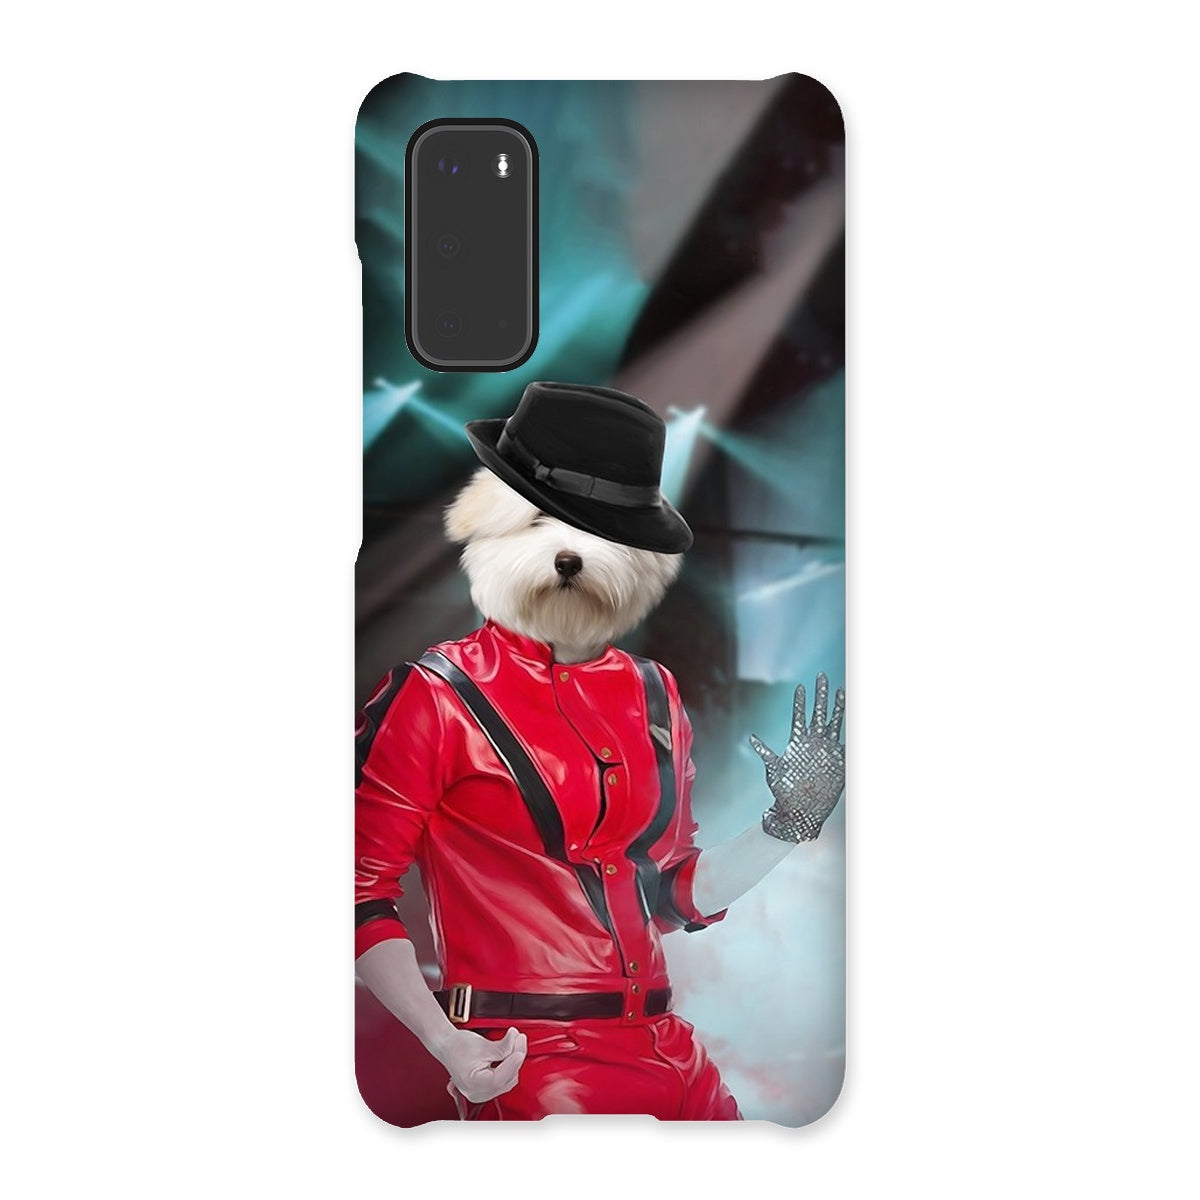 The Michael Jackson Paw & Glory, pawandglory, custom pet phone case, puppy phone case, iphone 11 case dogs, personalised puppy phone case, life is better with a dog phone case, dog and owner phone case, Pet Portraits phone case